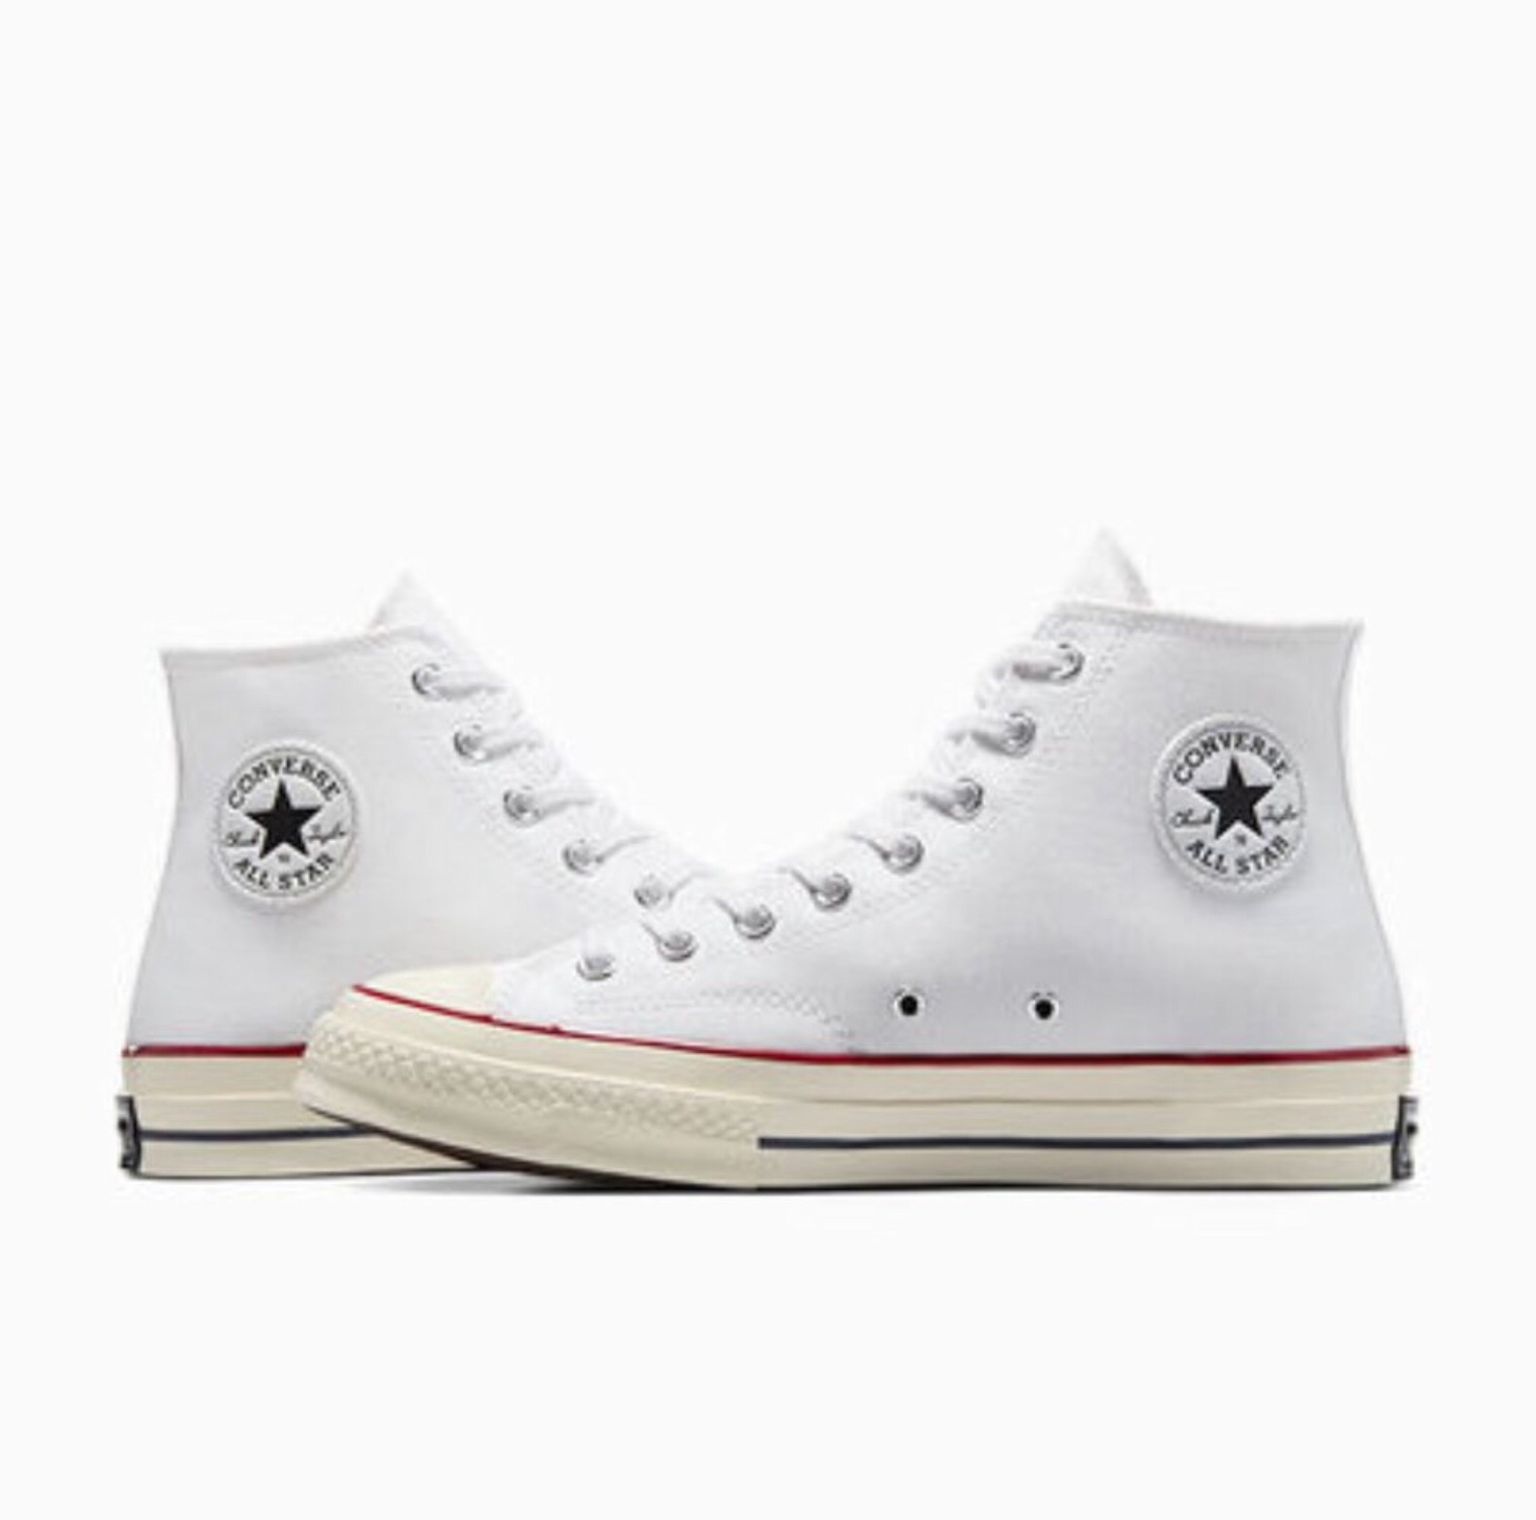 CONVERSE All Star 70's SNEAKERS High Top SHOES 10 Unisex SNEAKER Price CHEAP for Sale Los CA - OfferUp